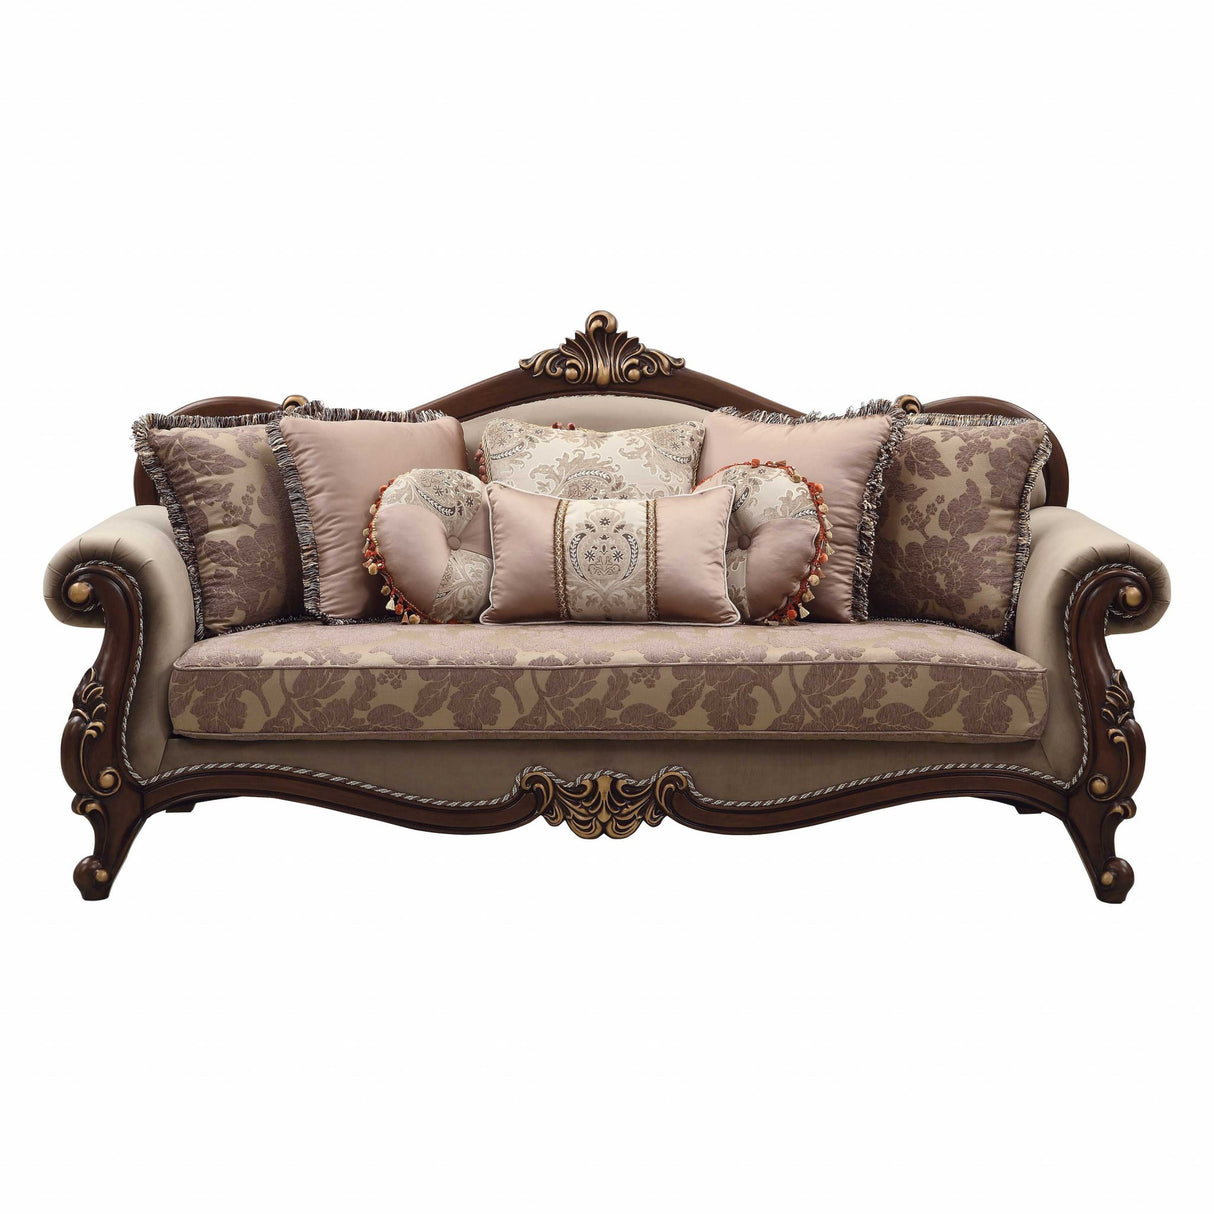 38" Beige Polyester Blend Curved Floral Sofa And Toss Pillows With Brown Legs